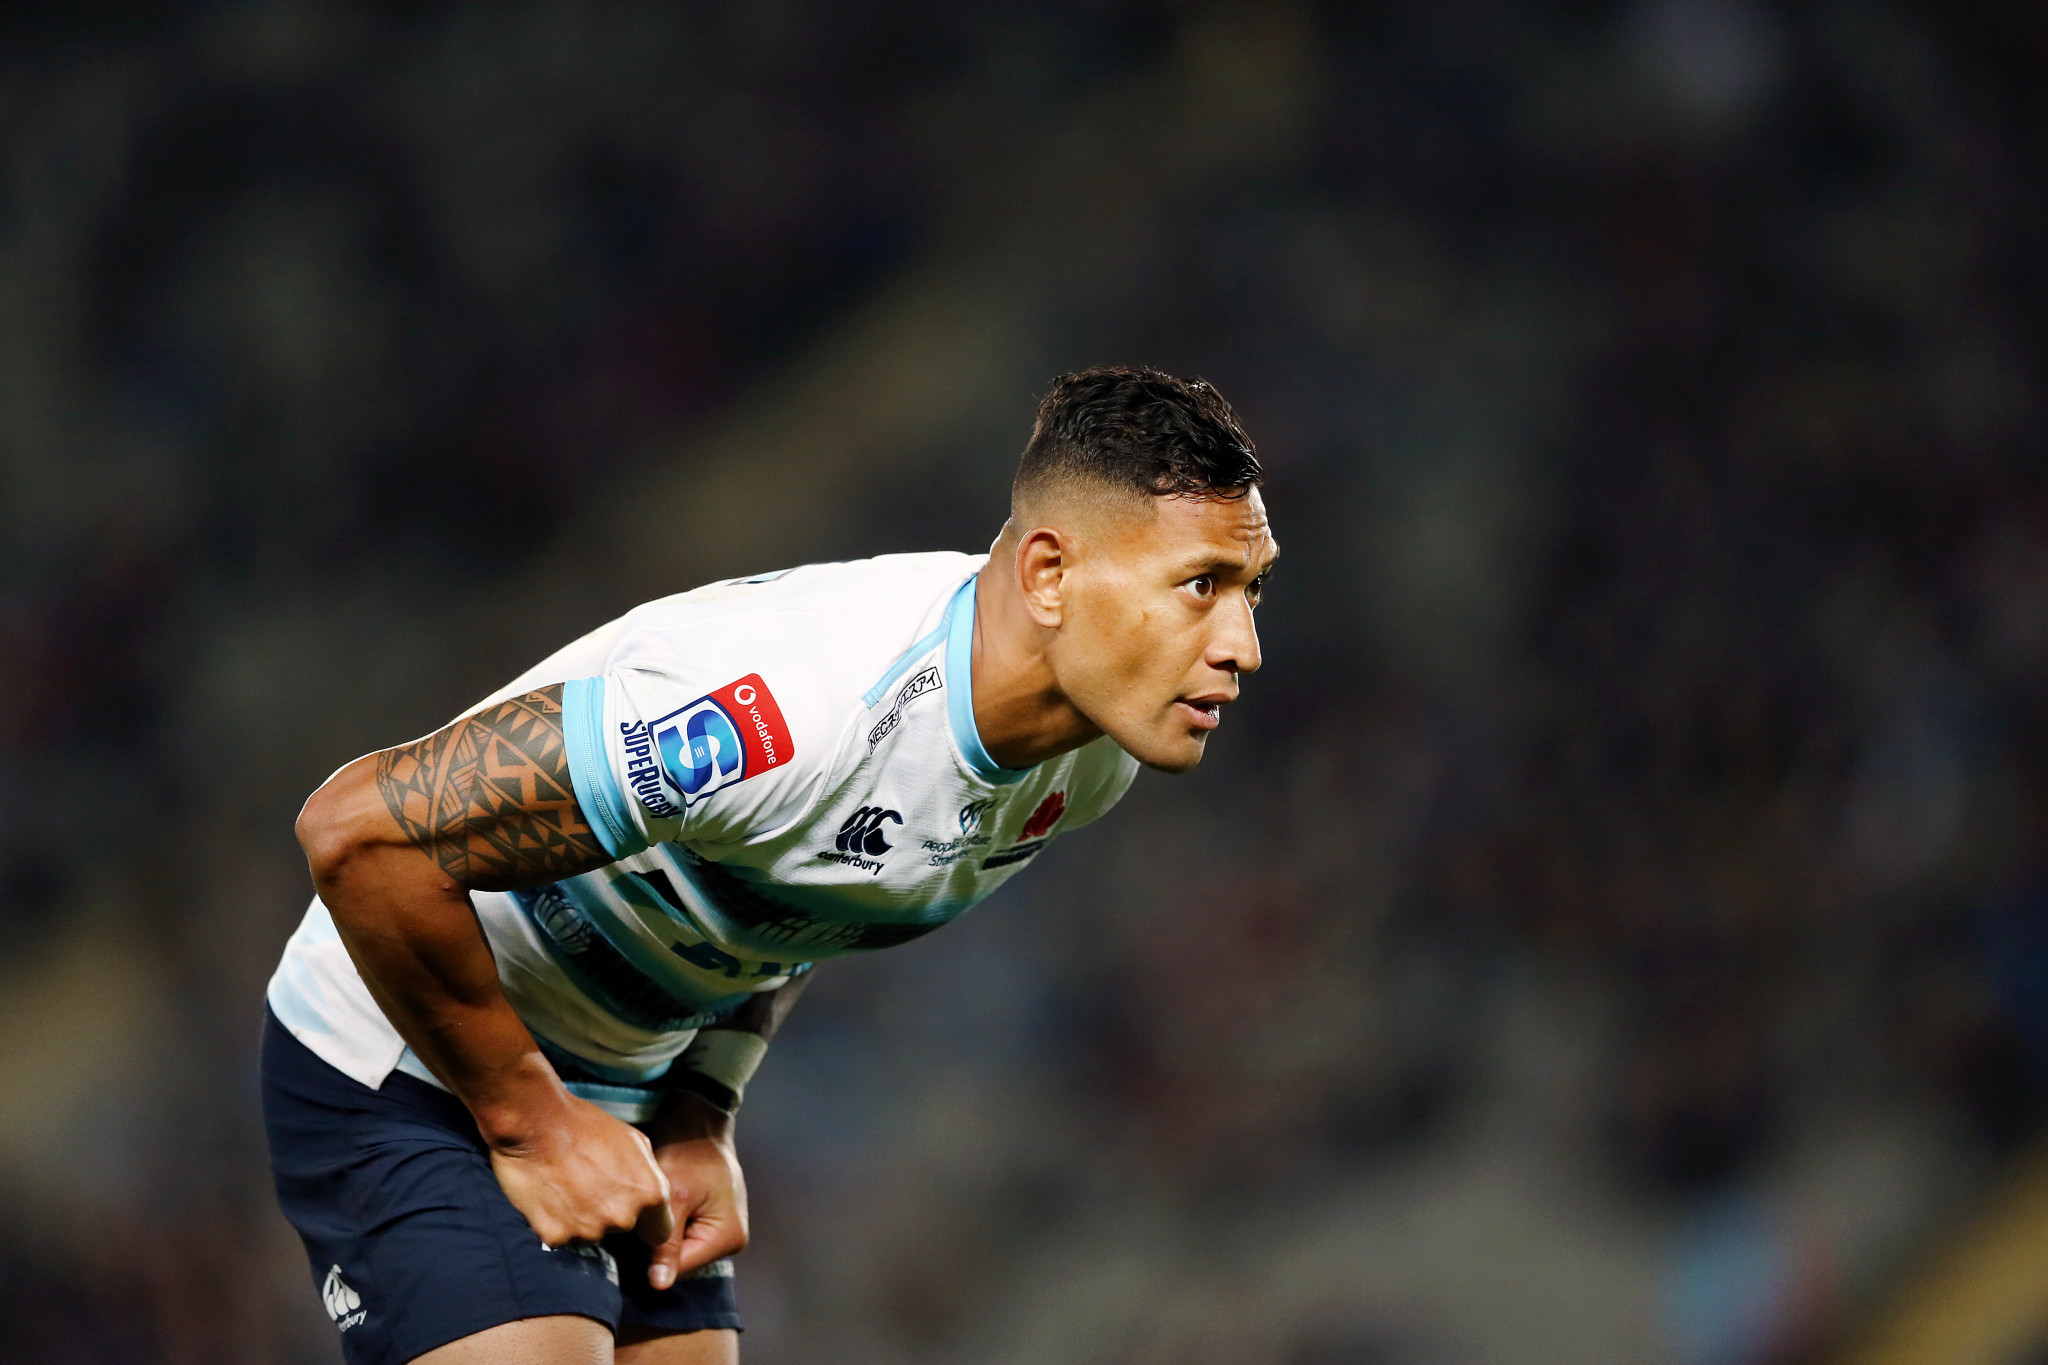 Folau “to launch legal action” against Rugby Australia following sacking for "hell awaits" comments